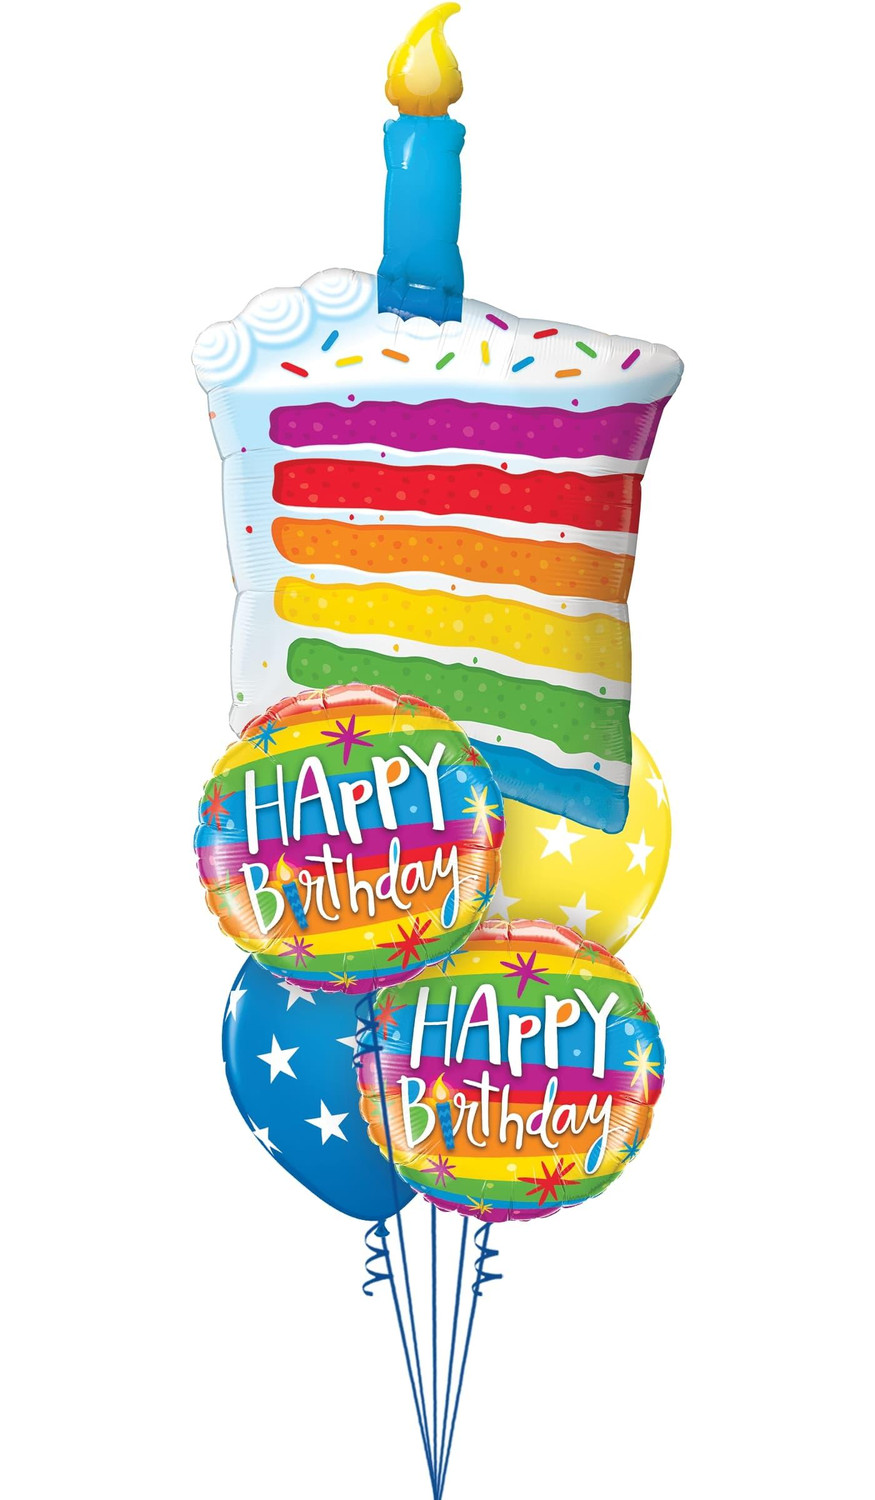 49379_49043_17317_rainbow_cake_candle_shape_staggered_clipped_rev_1.jpeg